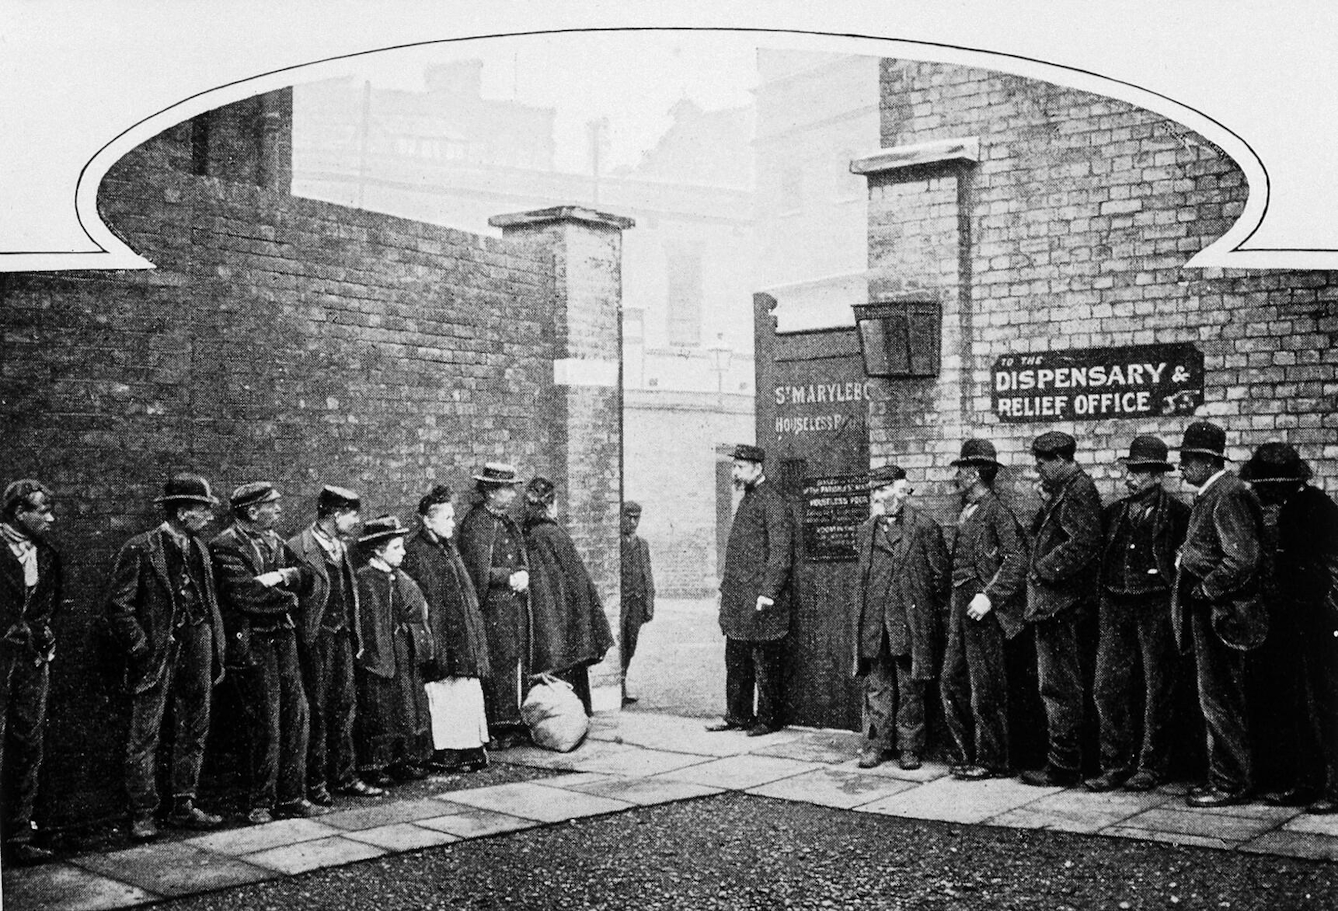 Black and white photograph showing people queuing outside Marylebone workhouse. Men make up the majority of the queue, although there are a few women. There is a sign behind one portion of the queues that reads 'Dispensary relief office'. 